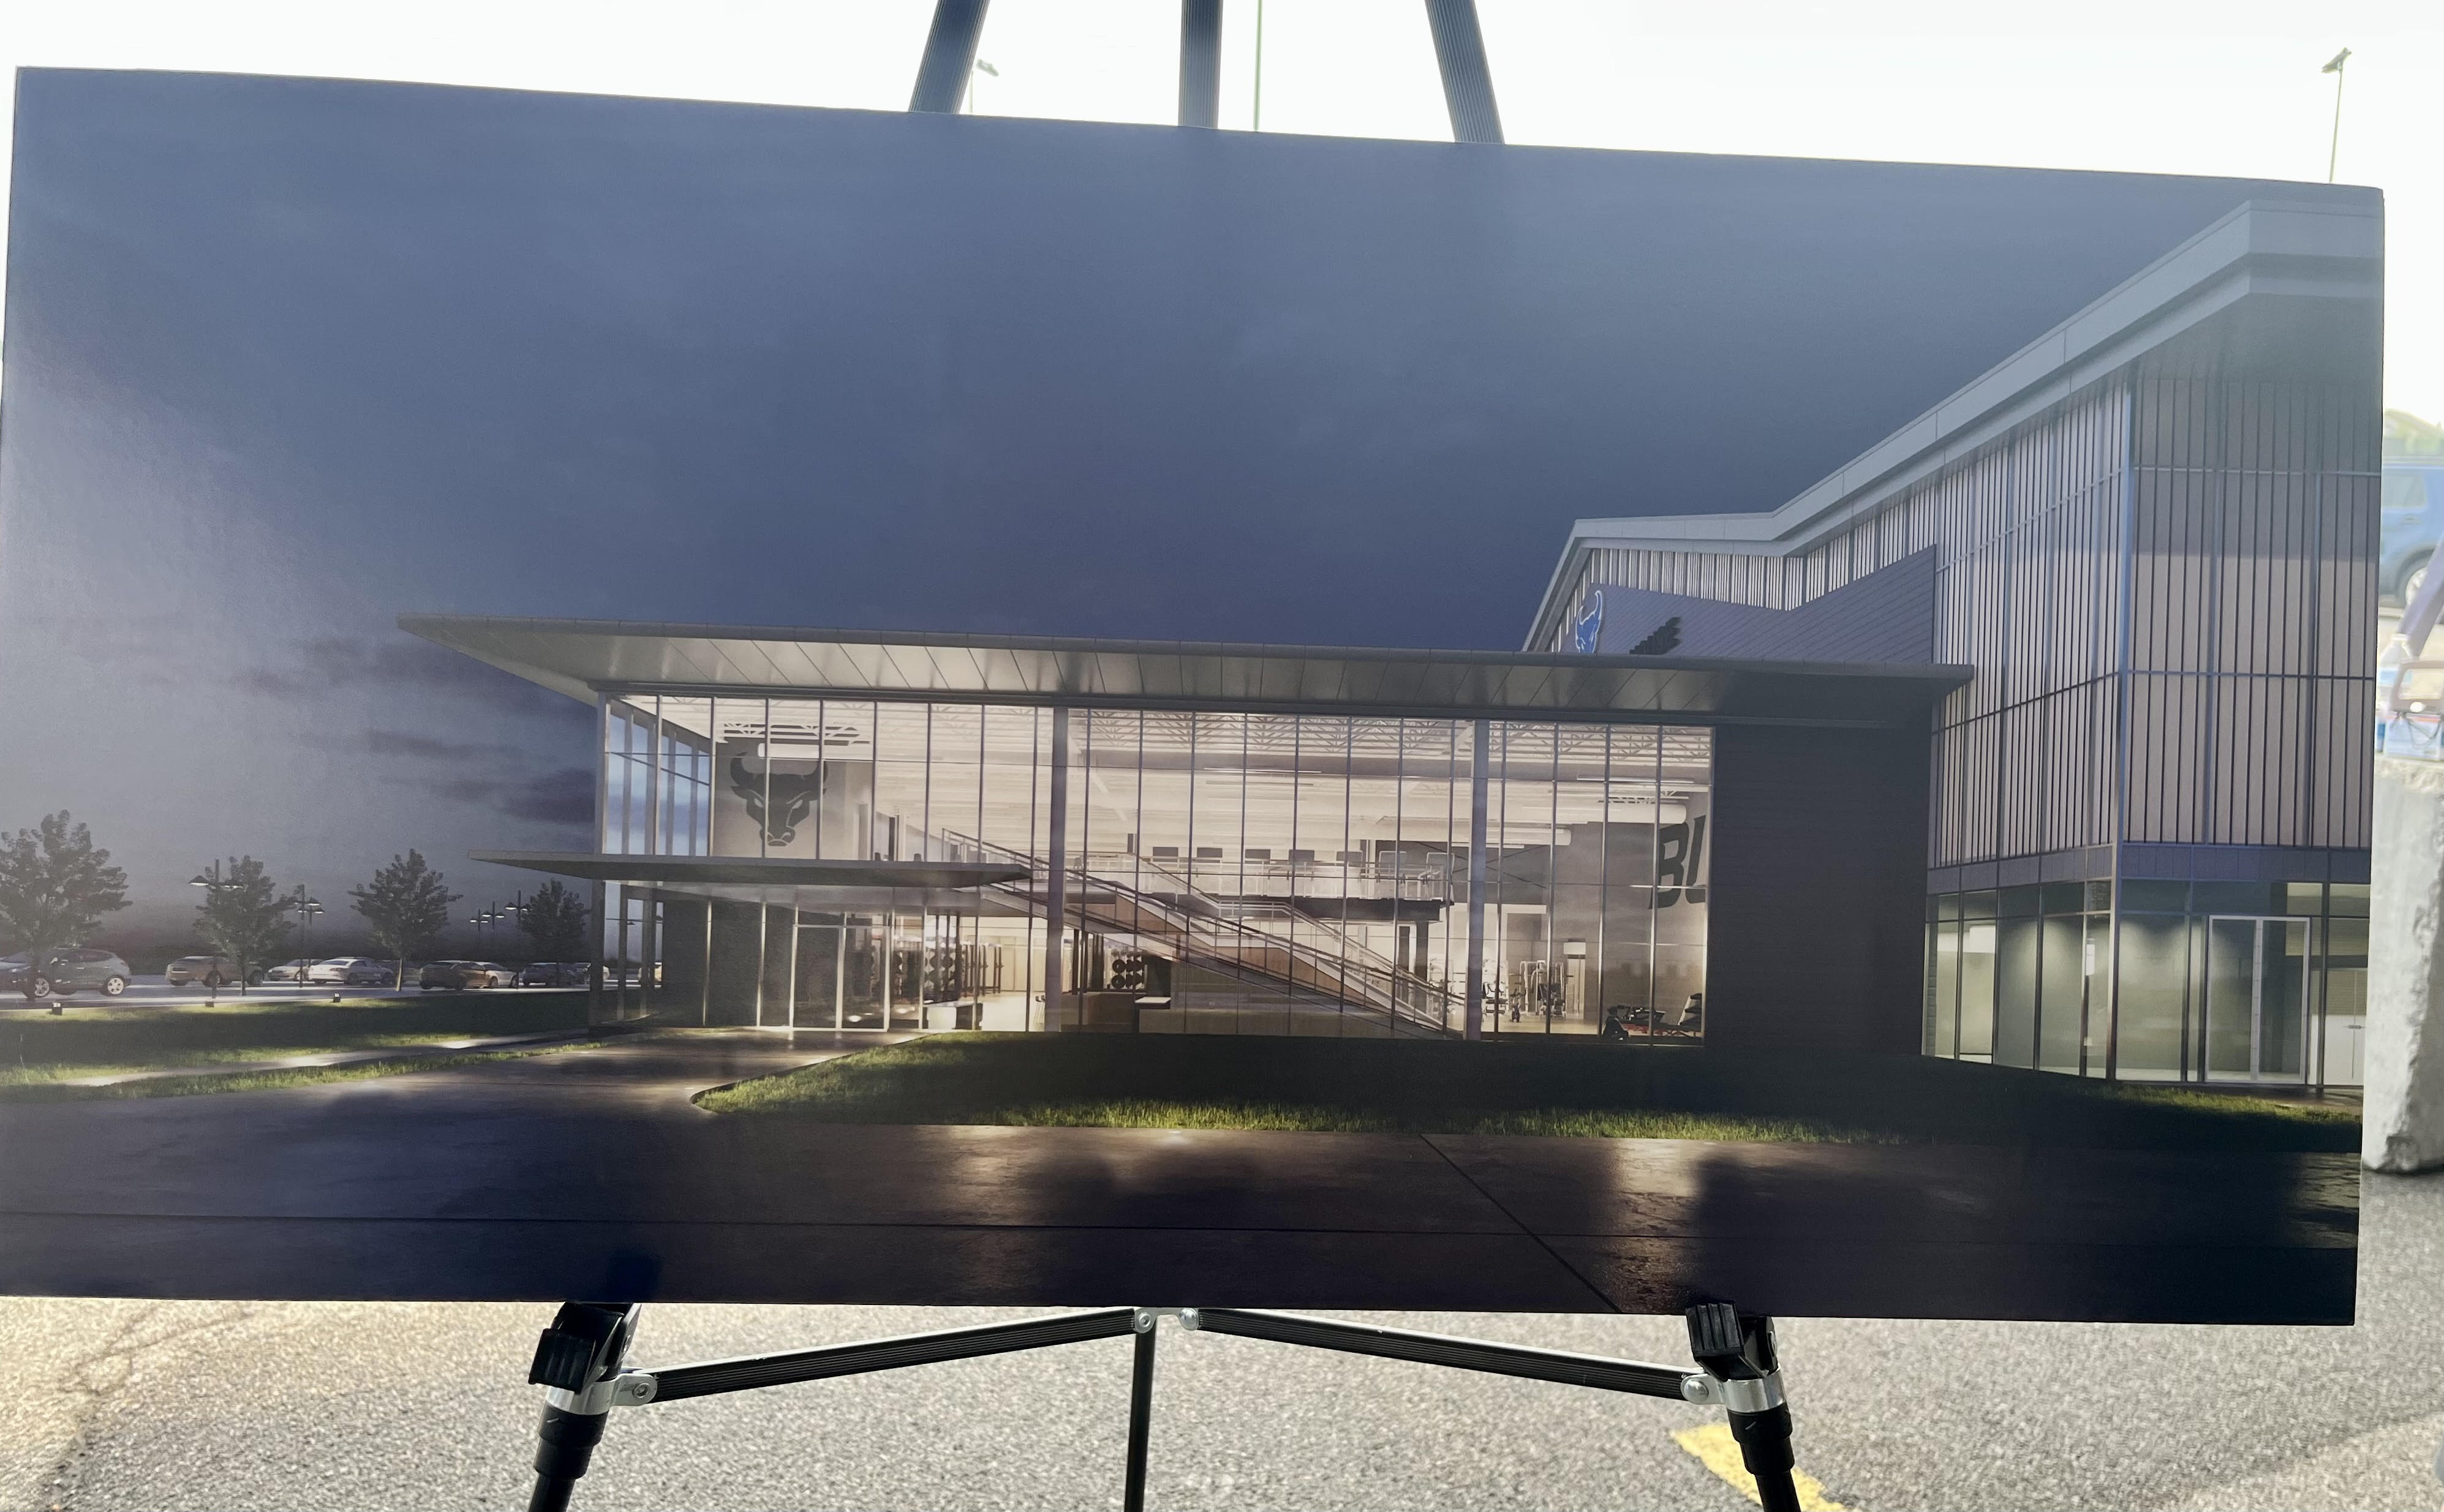 Groundbreaking on new sports performance center for University at Buffalo